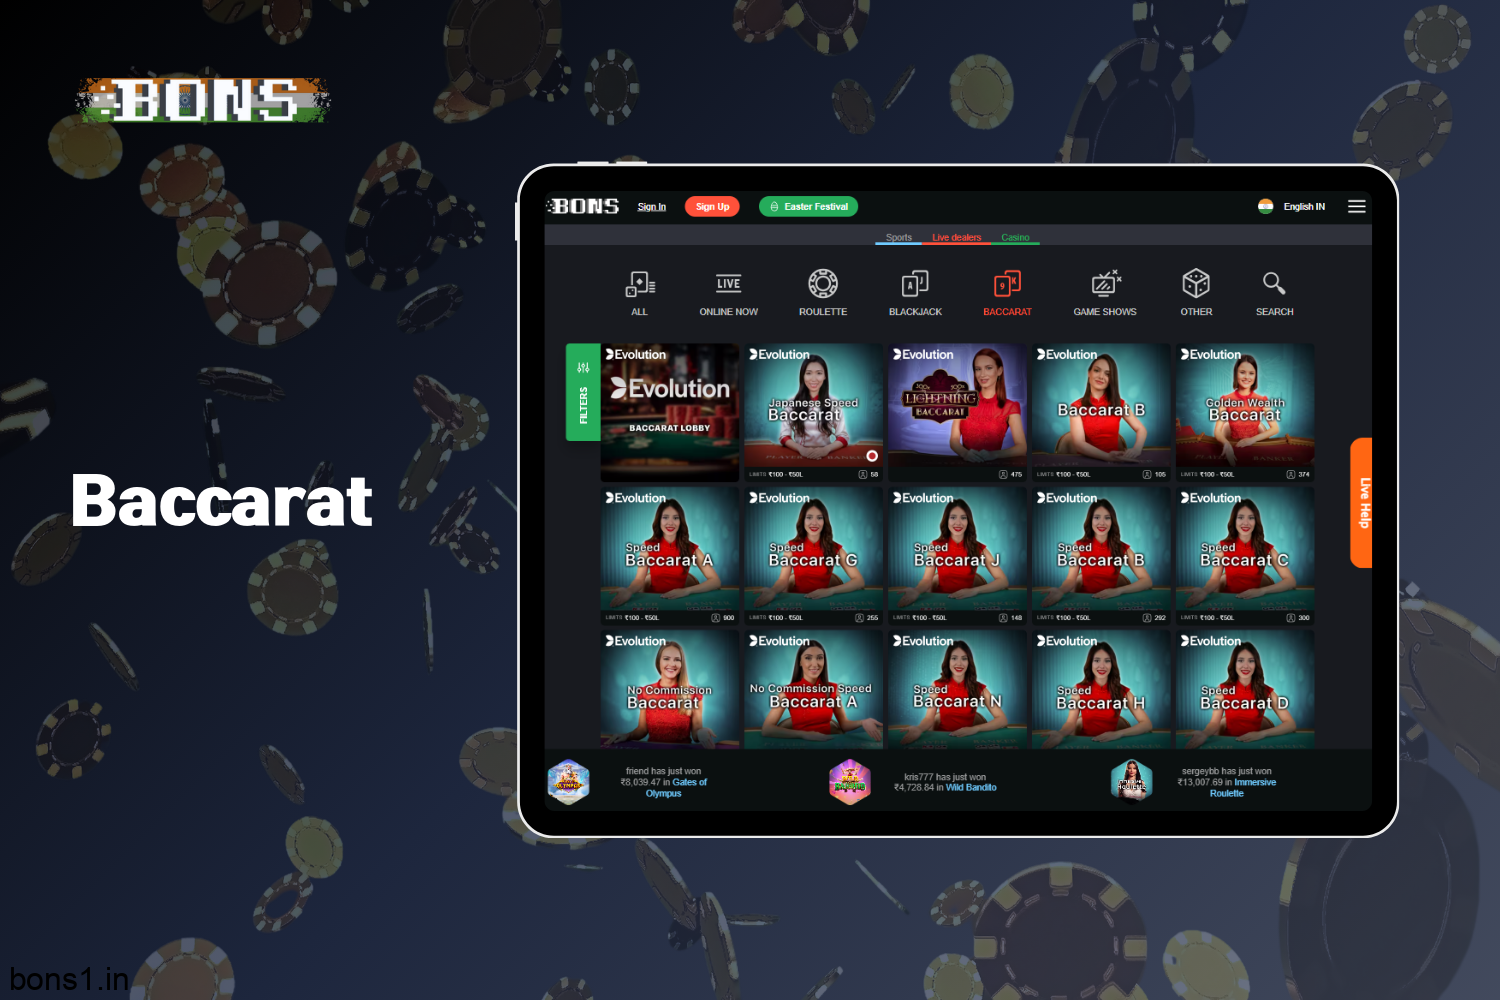 Bons Casino has a great selection of Baccarat games for players from India in the Live Casino section